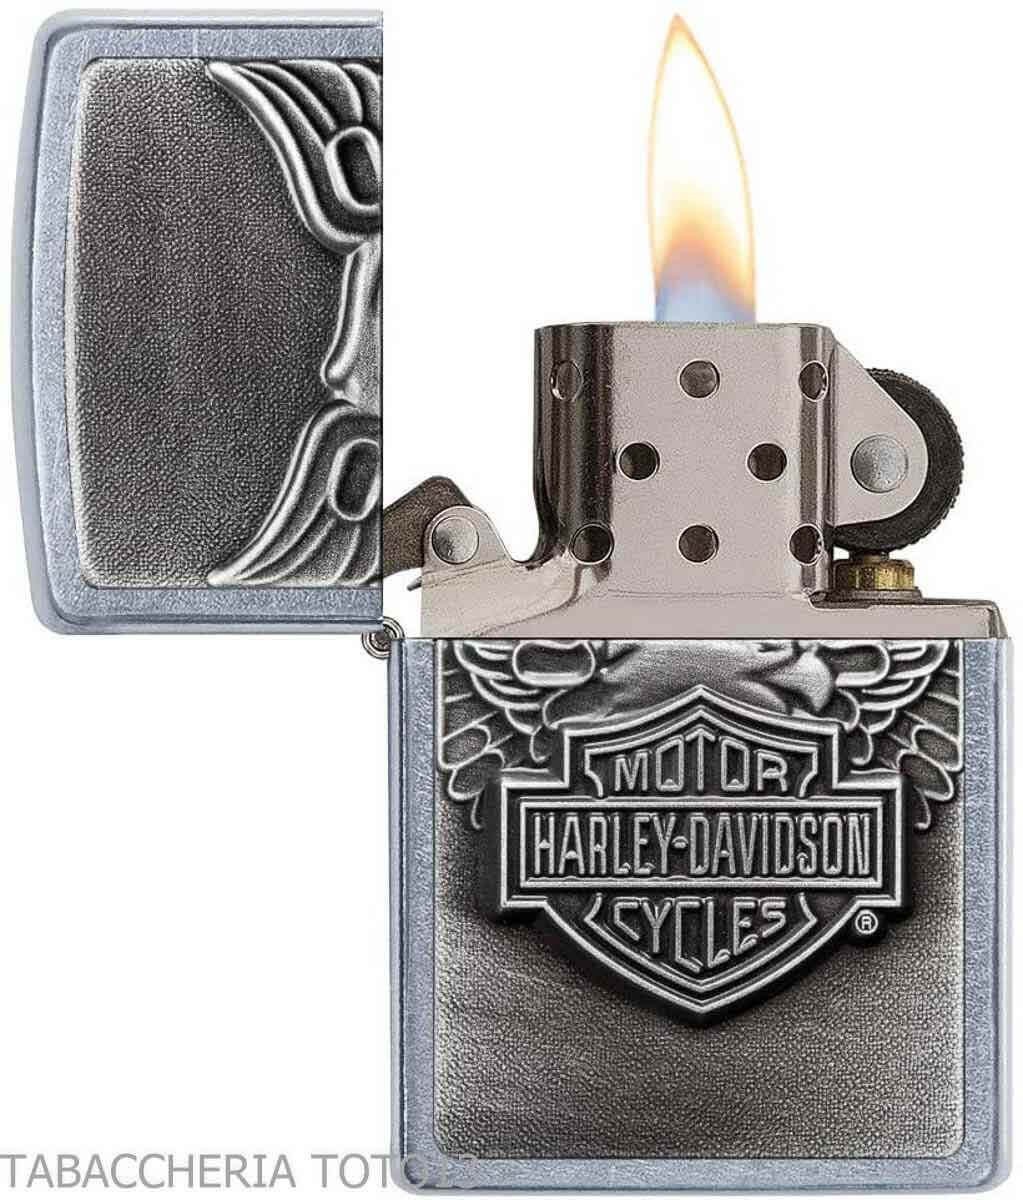 New Zippo Harley Davidson iron eagle plaque | Online selling